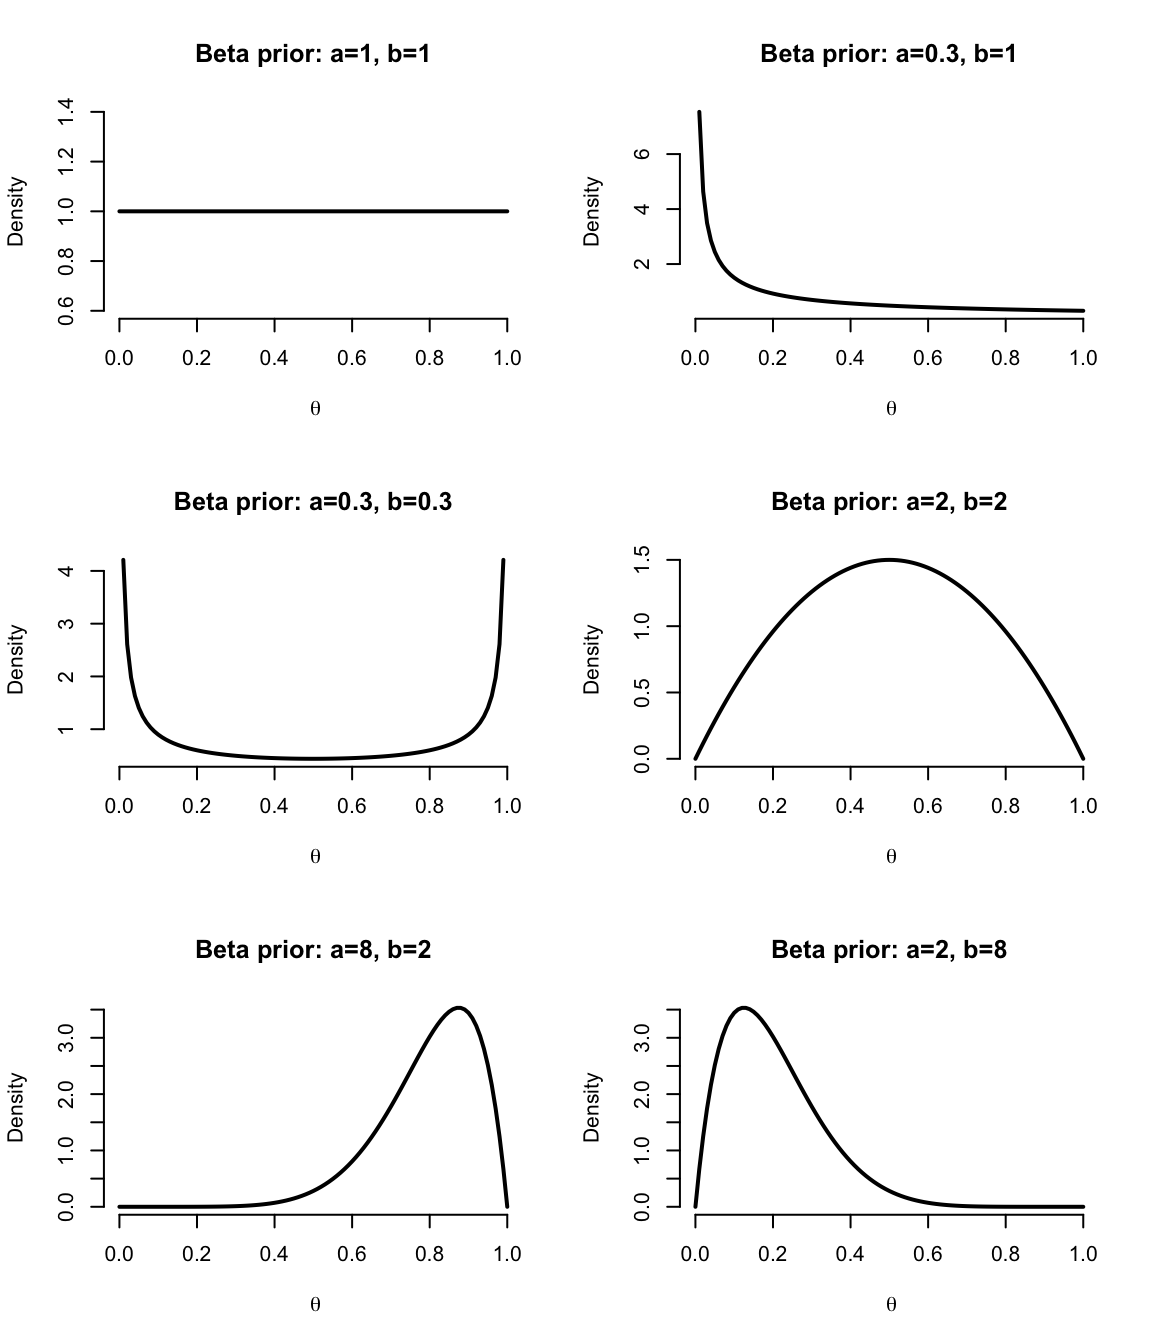 Beta distribution functions for various values of a, b